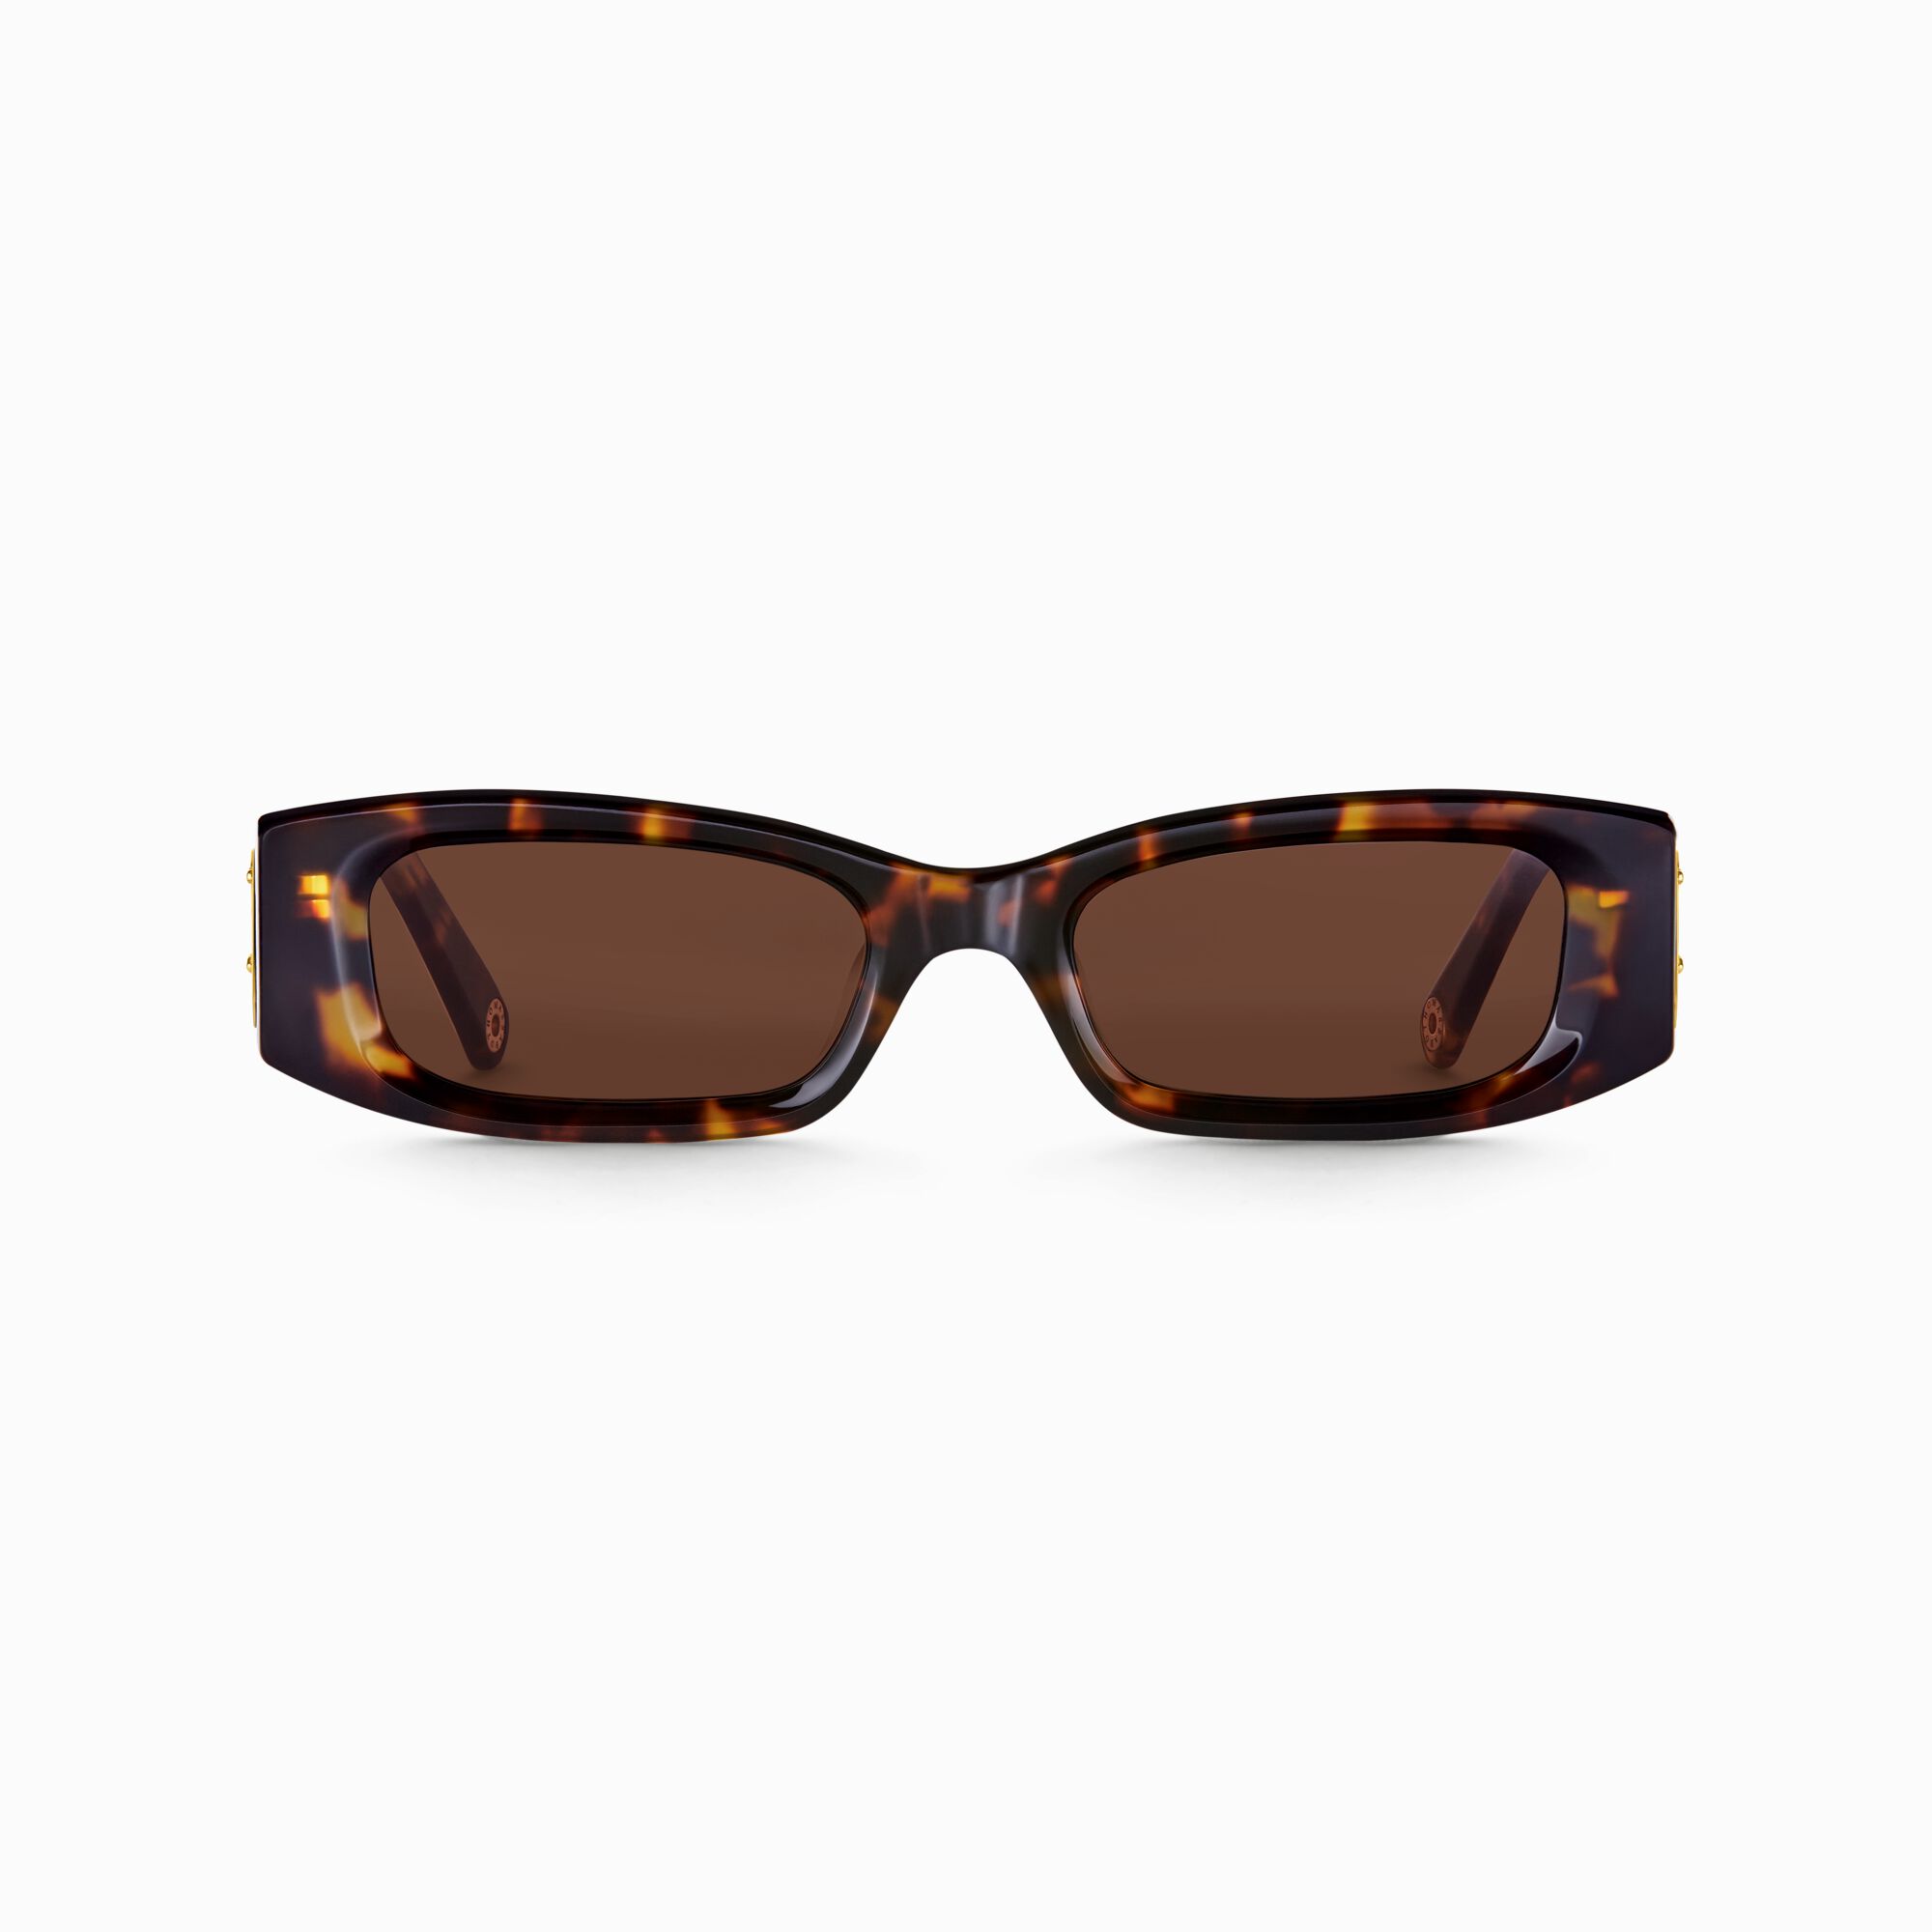 Sunglasses Kim slim rectangular havana from the  collection in the THOMAS SABO online store